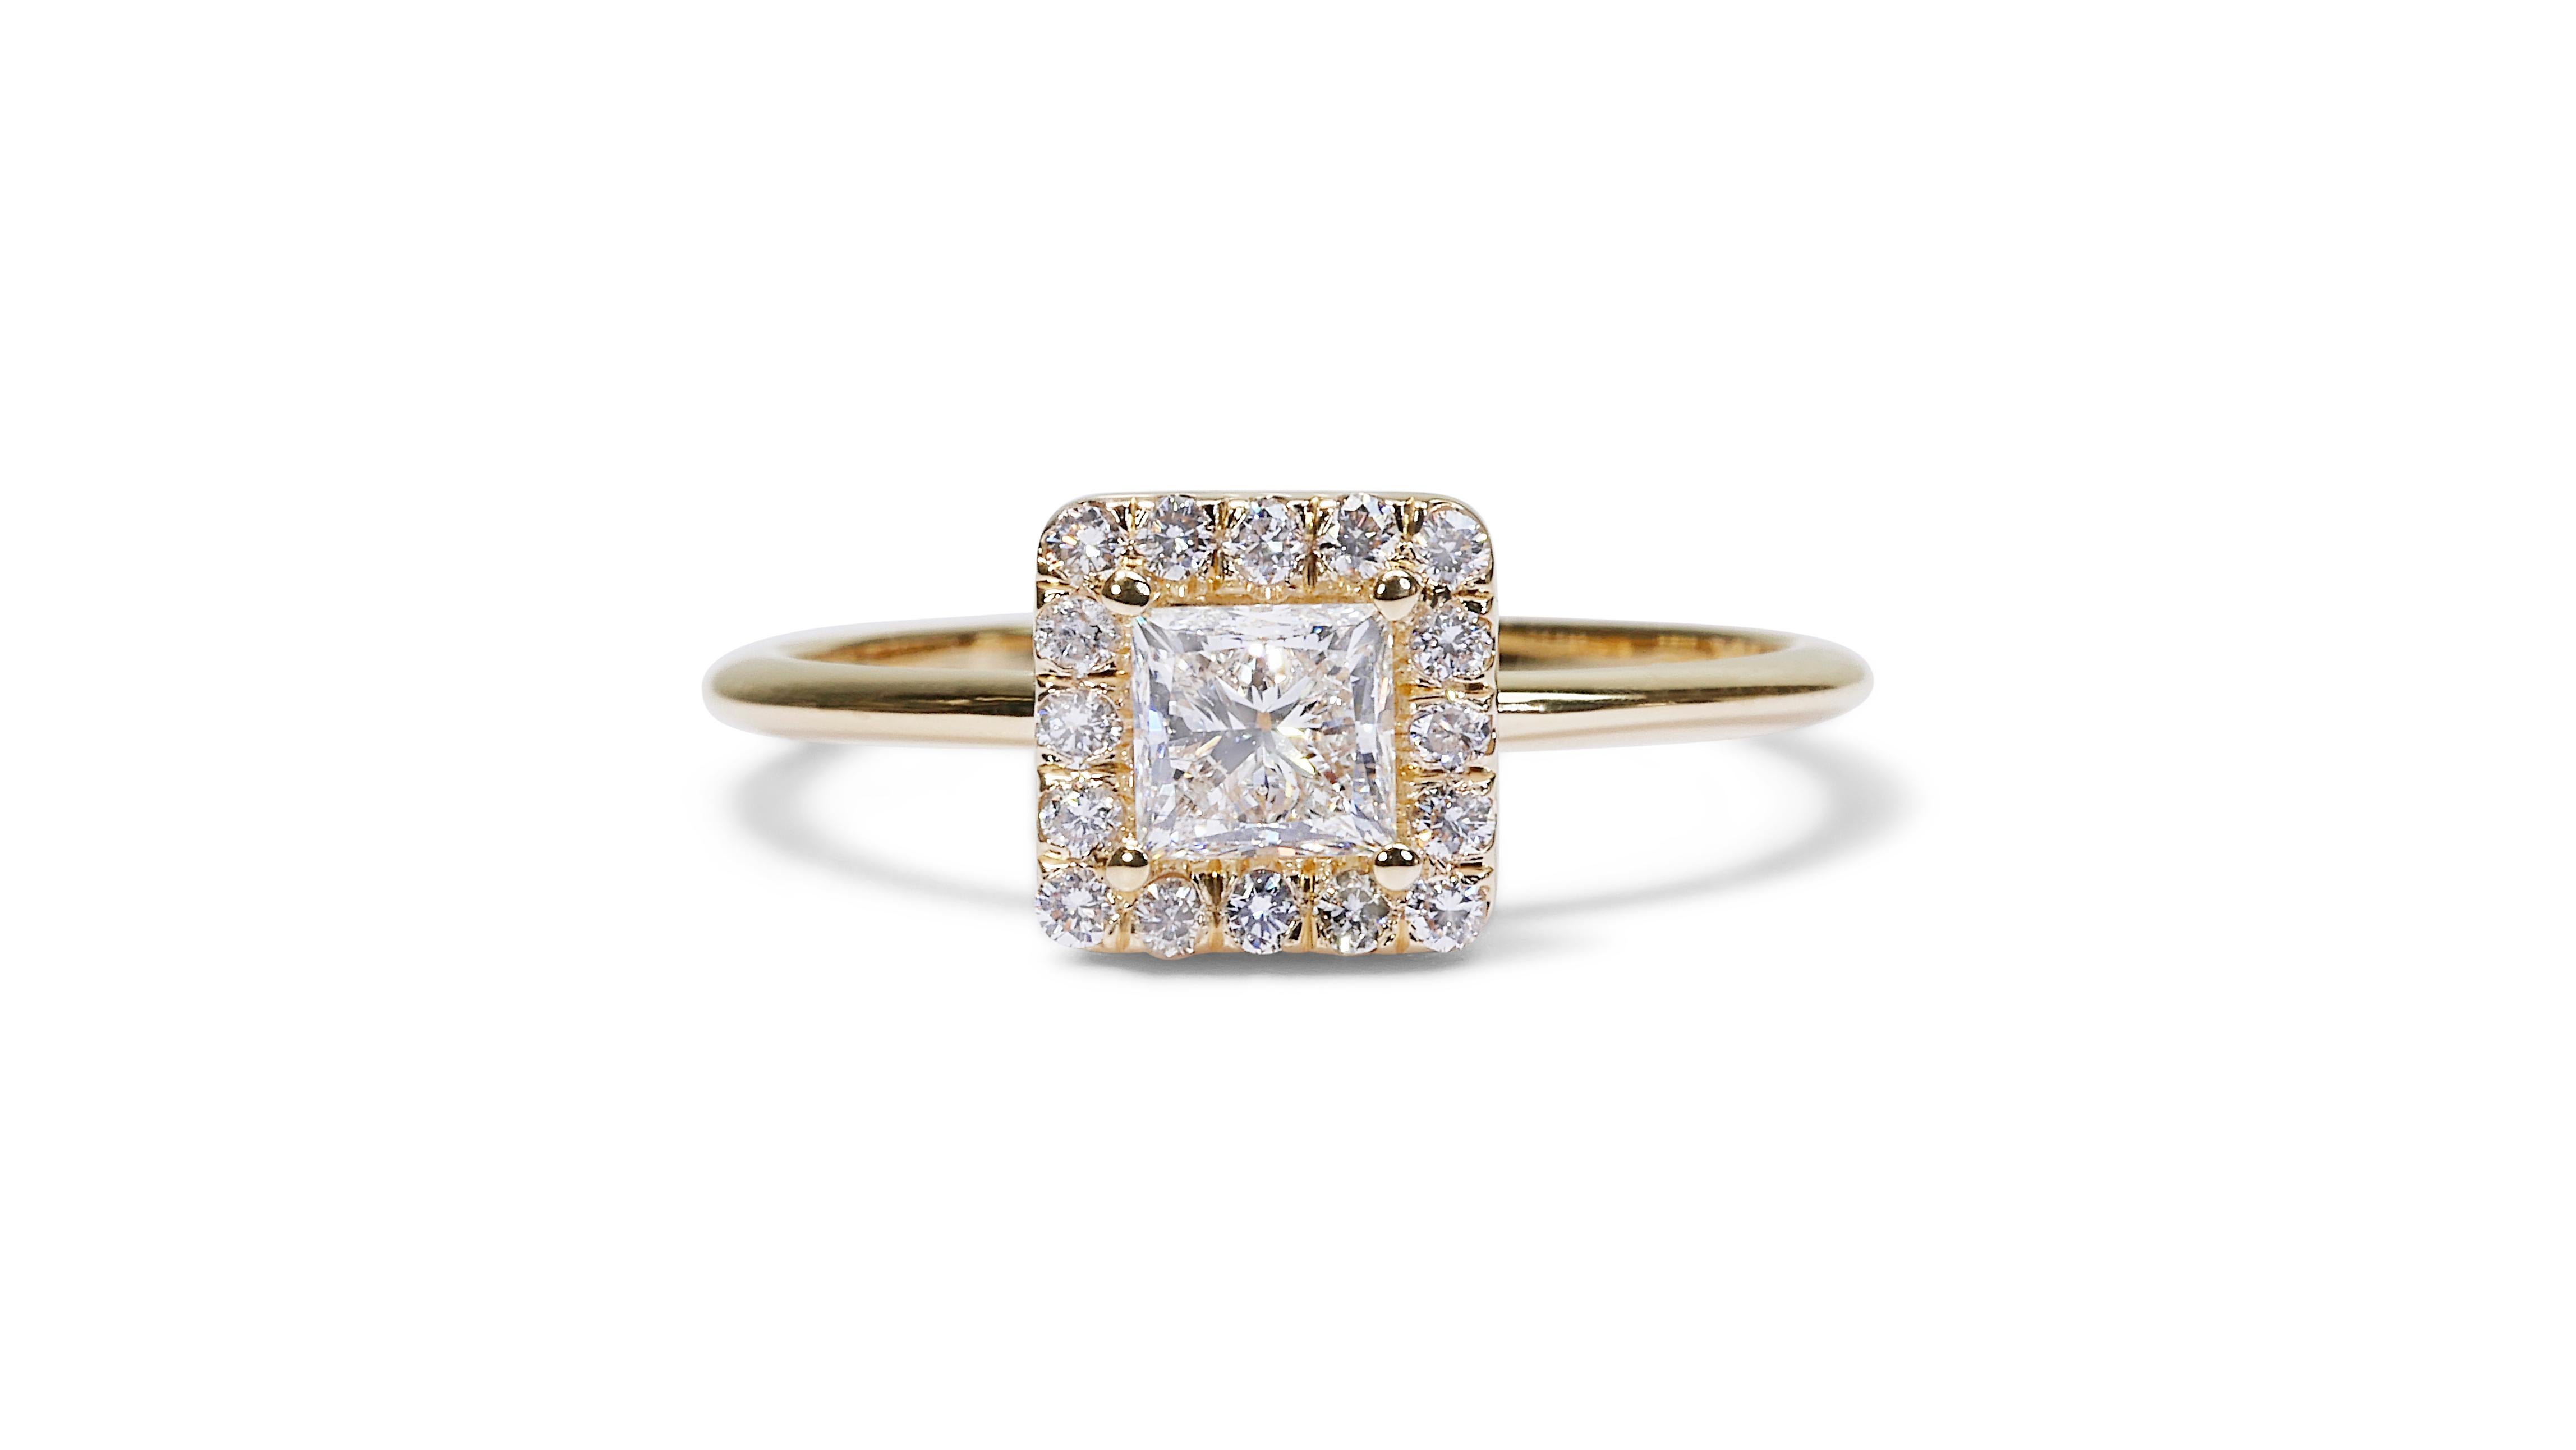 Charming 0.90ct Square-Cut Diamond Halo Ring in 18k Yellow Gold - GIA Certified

This elegantly designed diamond halo ring, crafted from rich 18k yellow gold, features a captivating 0.73-carat square-cut diamond at its centerpiece. Complemented by